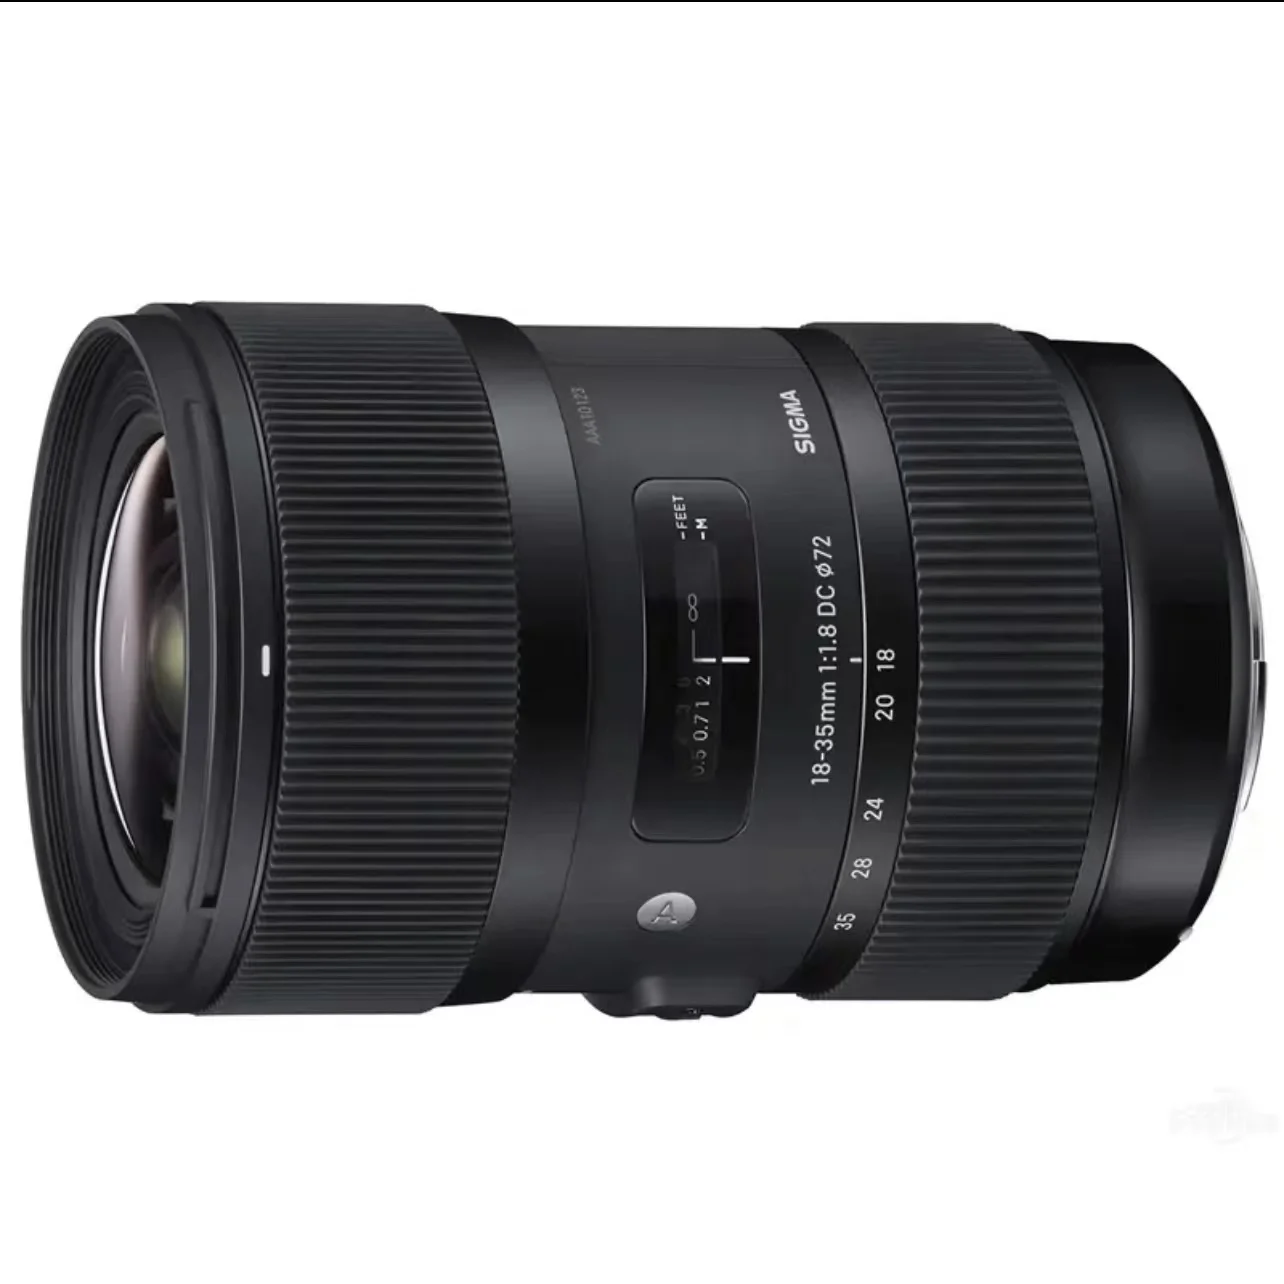 

Used digital camera zoom lens, Sigma The Sigma 18-35mm/F 1.8 DG DN OS Motion Zoom lens is suitable for half-format